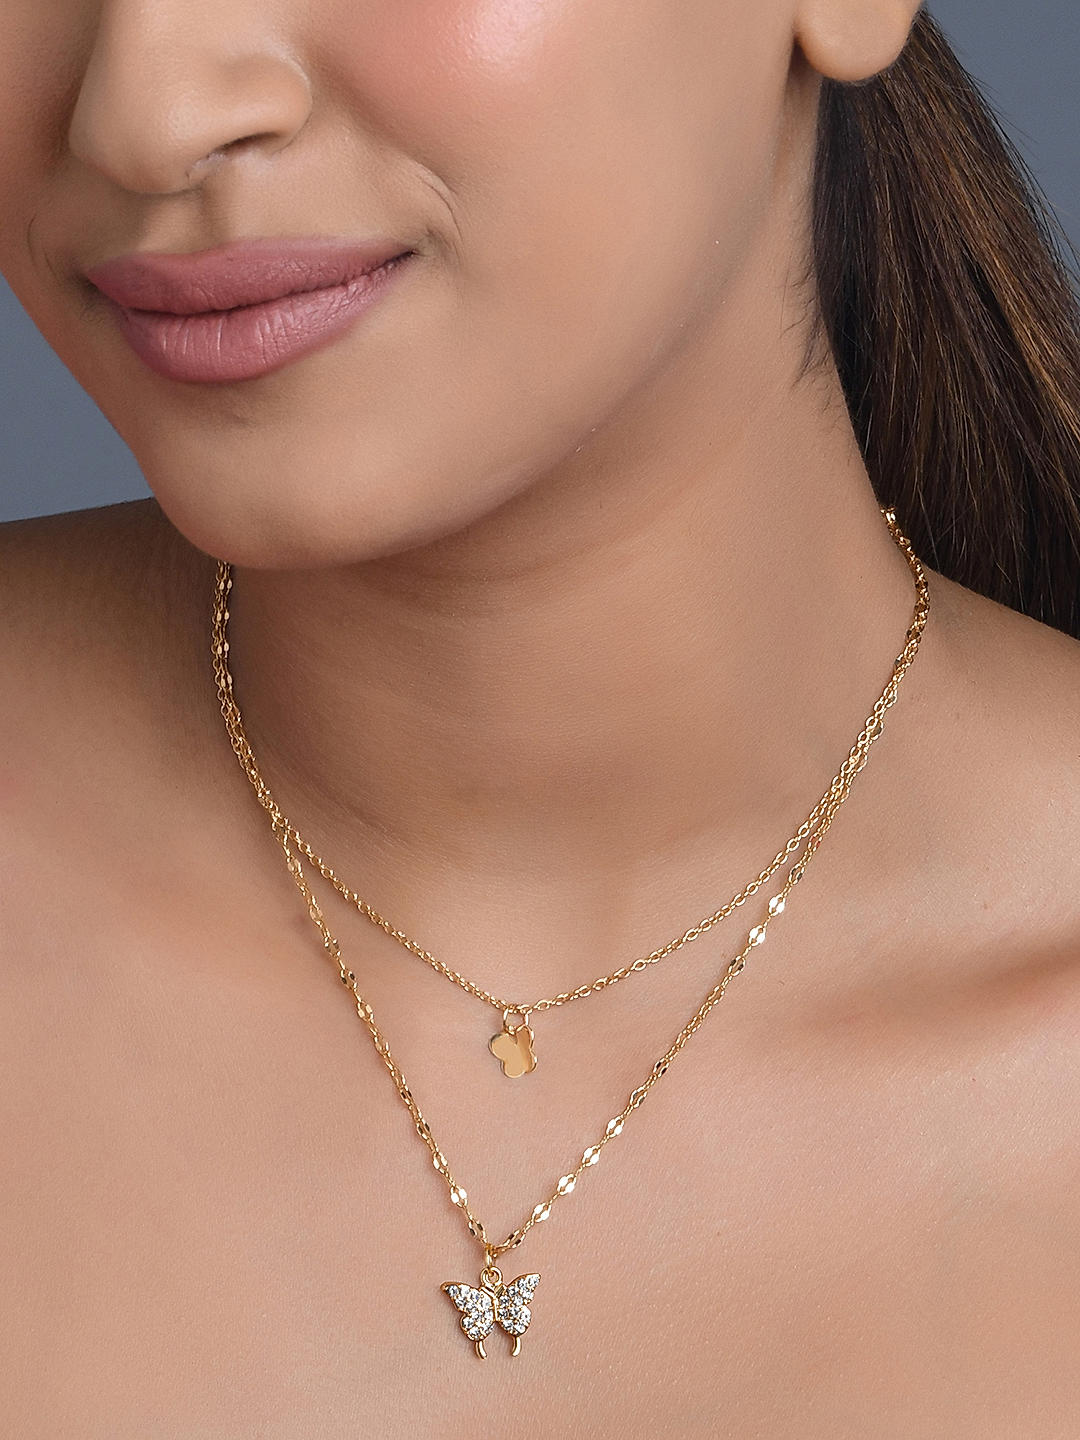 GIVA 925 Sterling Silver 18k Gold Plated Mini Charm Necklace | Valentines  Gifts for Girlfriend, Gifts for Women and Girls |With Certificate of  Authenticity and 925 Stamp | 6 Month Warranty* : Amazon.in: Jewellery